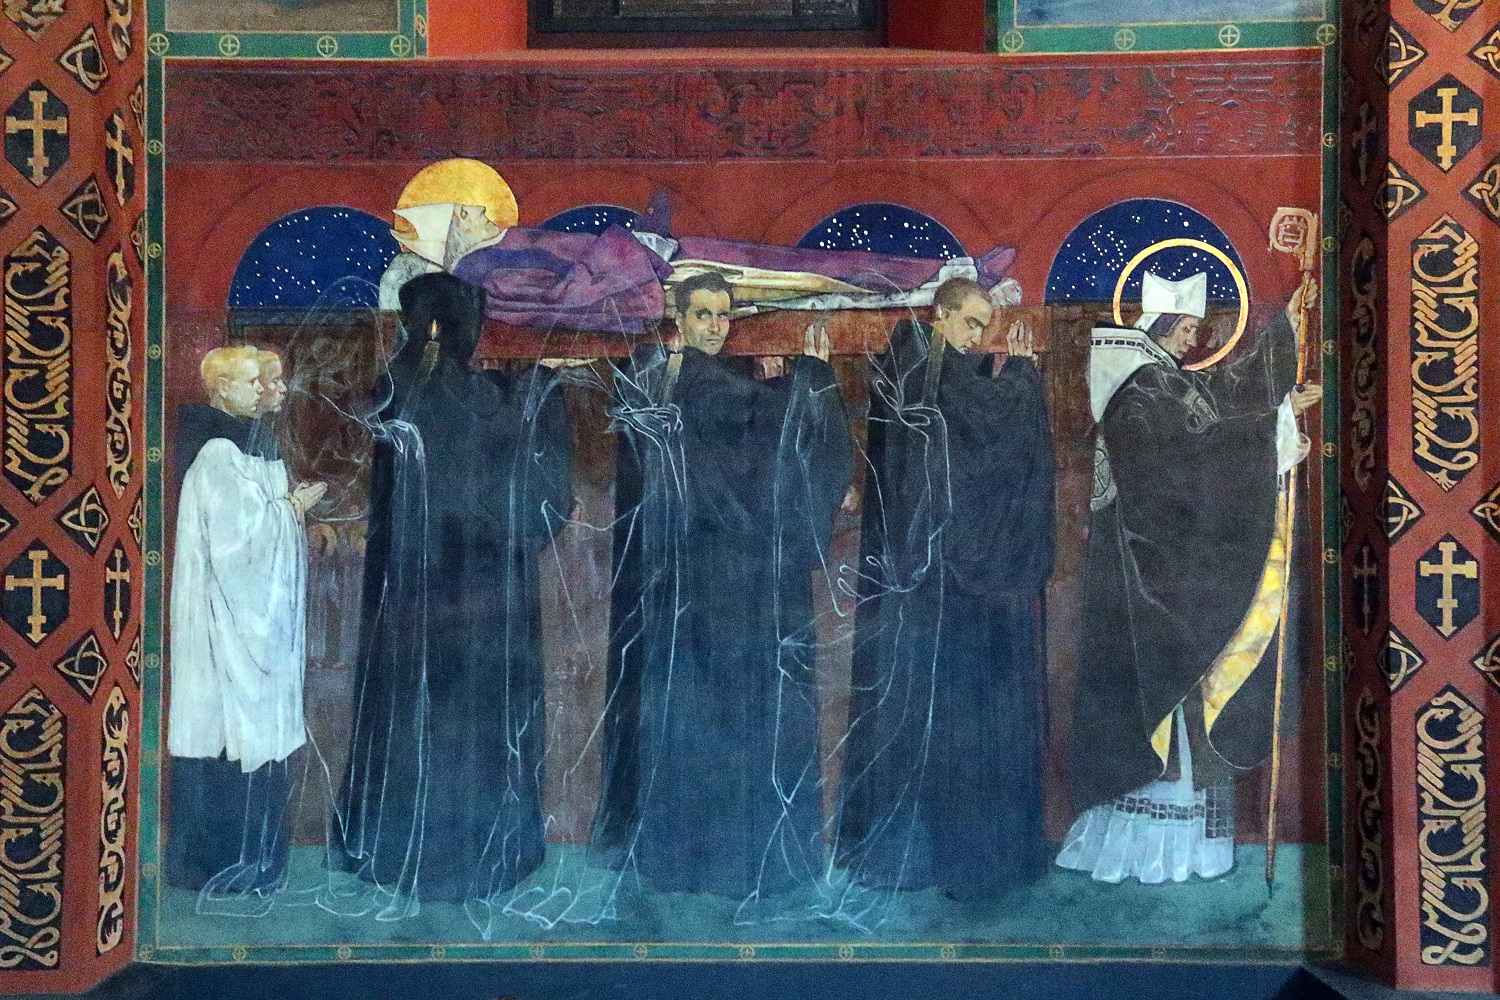 "Burial of st. Odilo" at the Armenian cathedral.